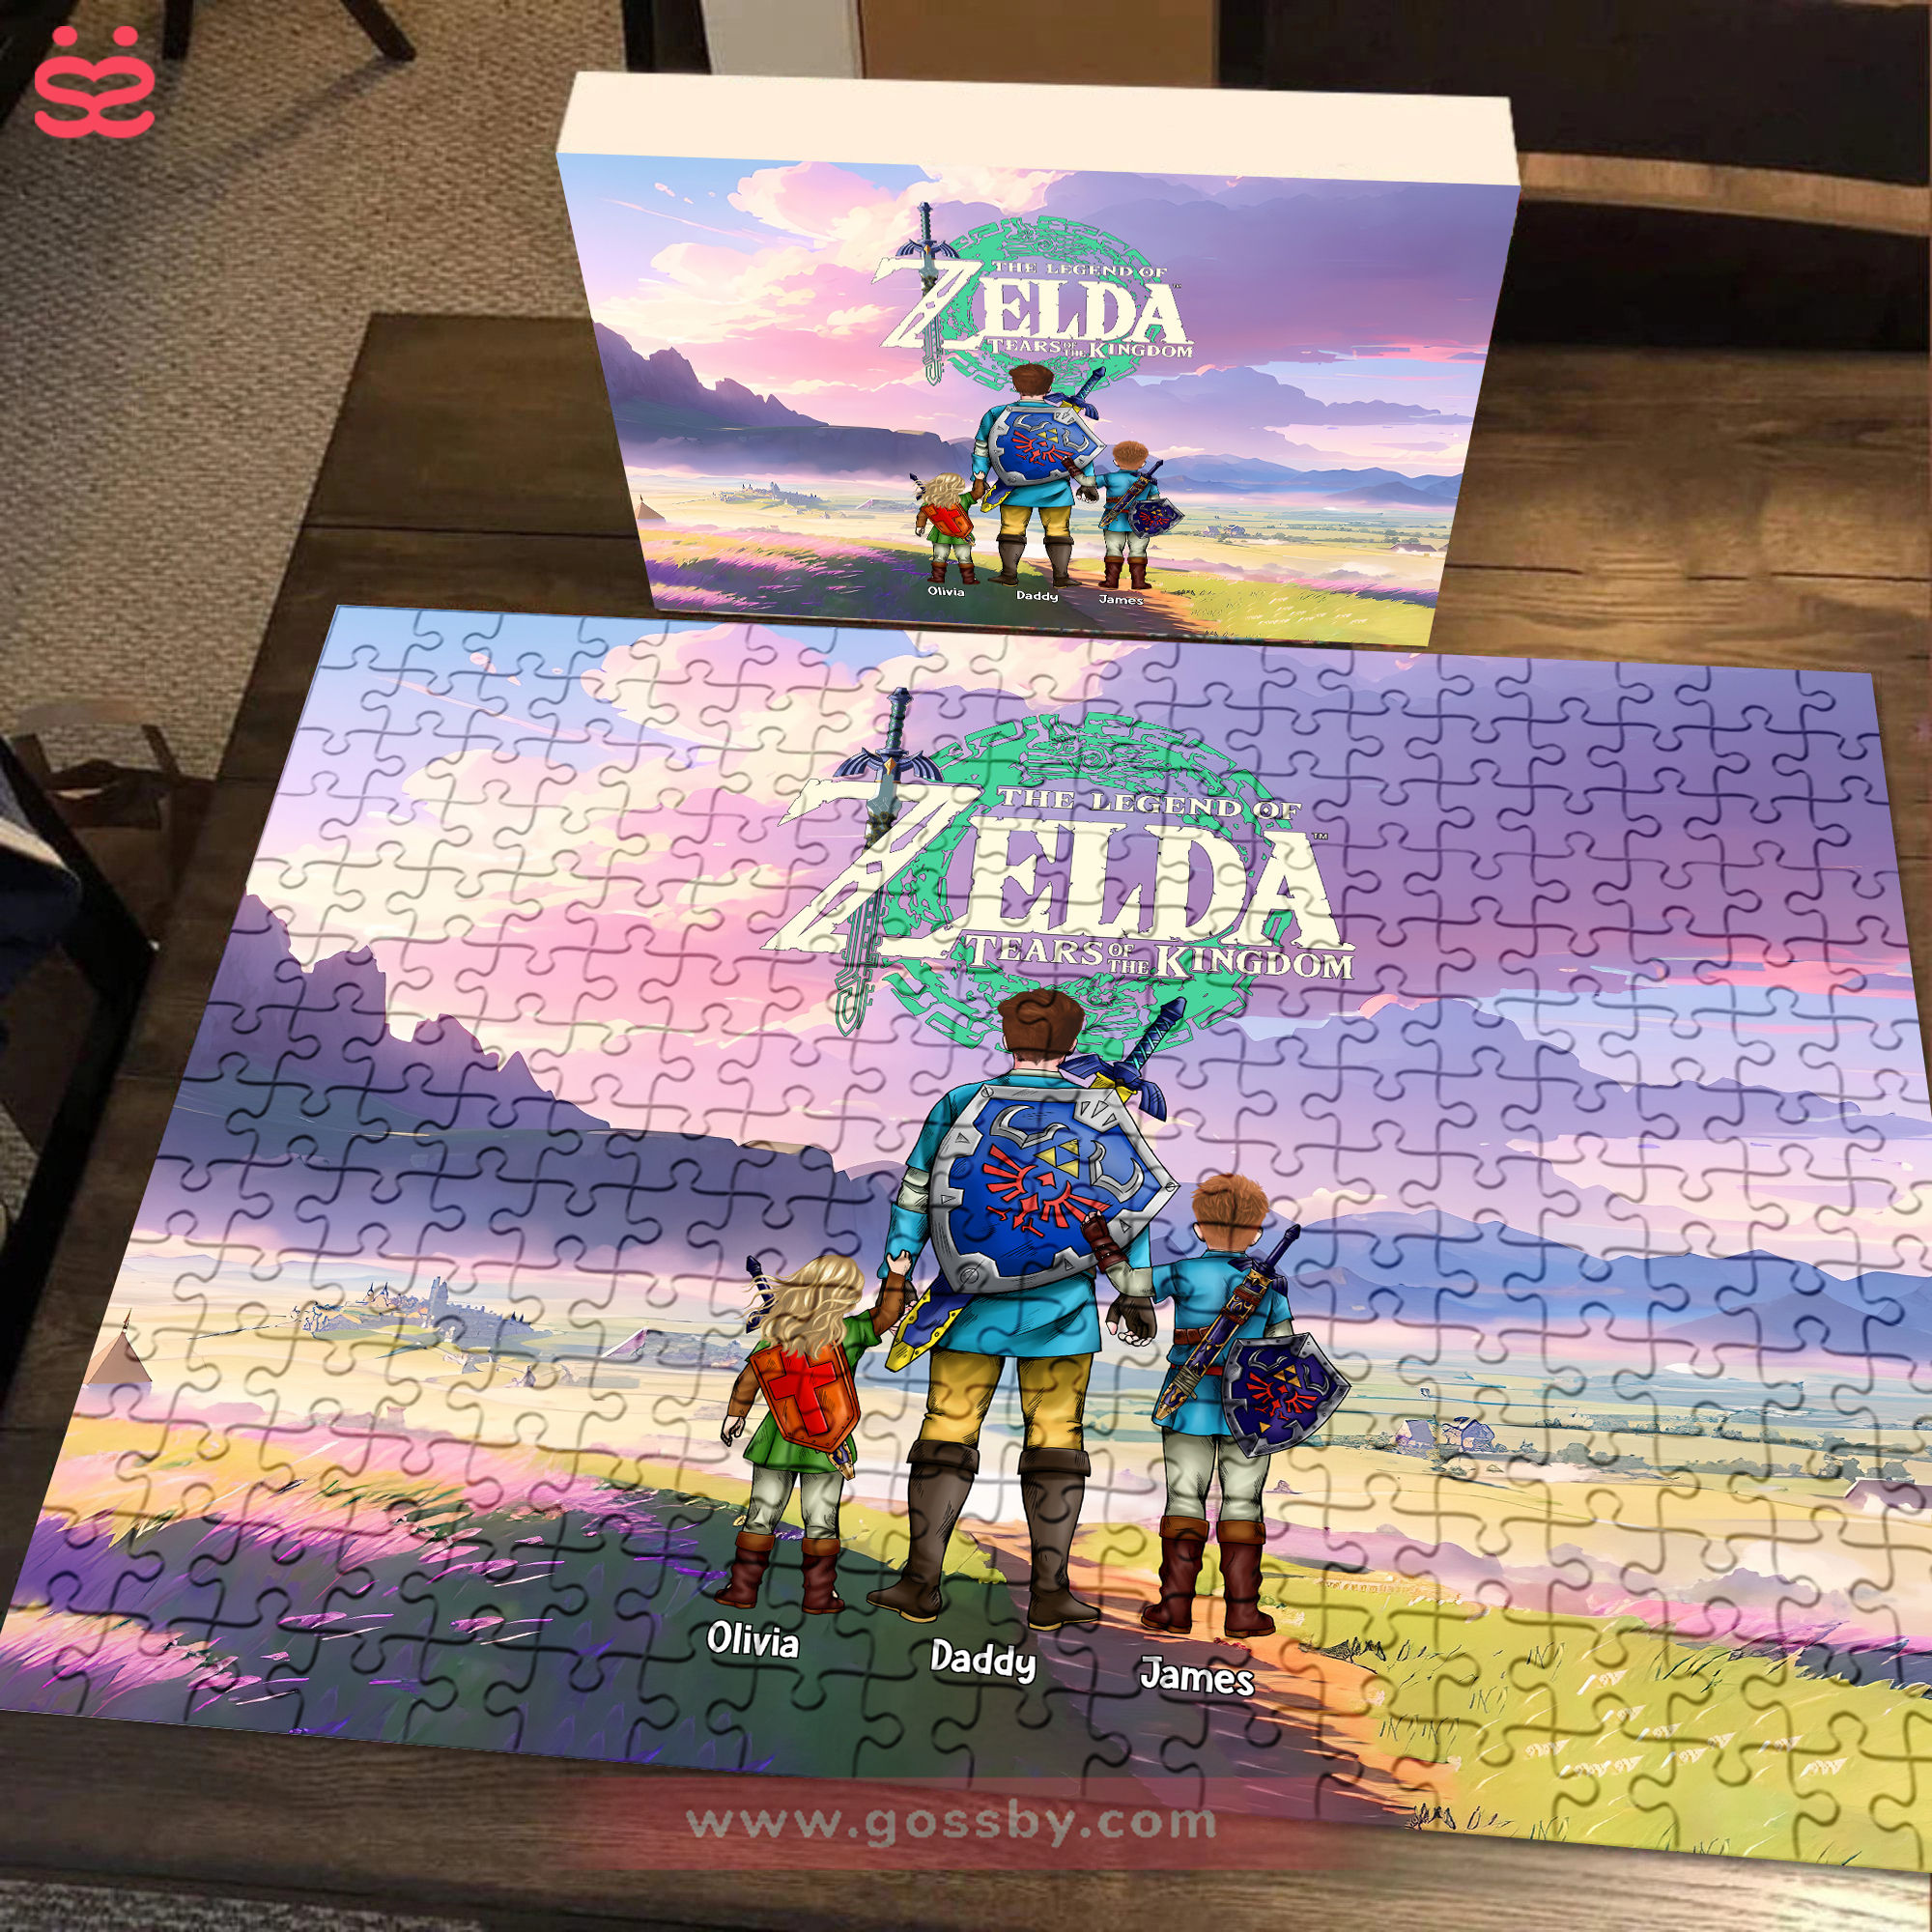 The Legend of Zelda Tears of The Kingdom 1000 Piece Jigsaw Puzzle |  Collectible Puzzle Featuring Link from The Legend of Zelda Video Game |  Officially